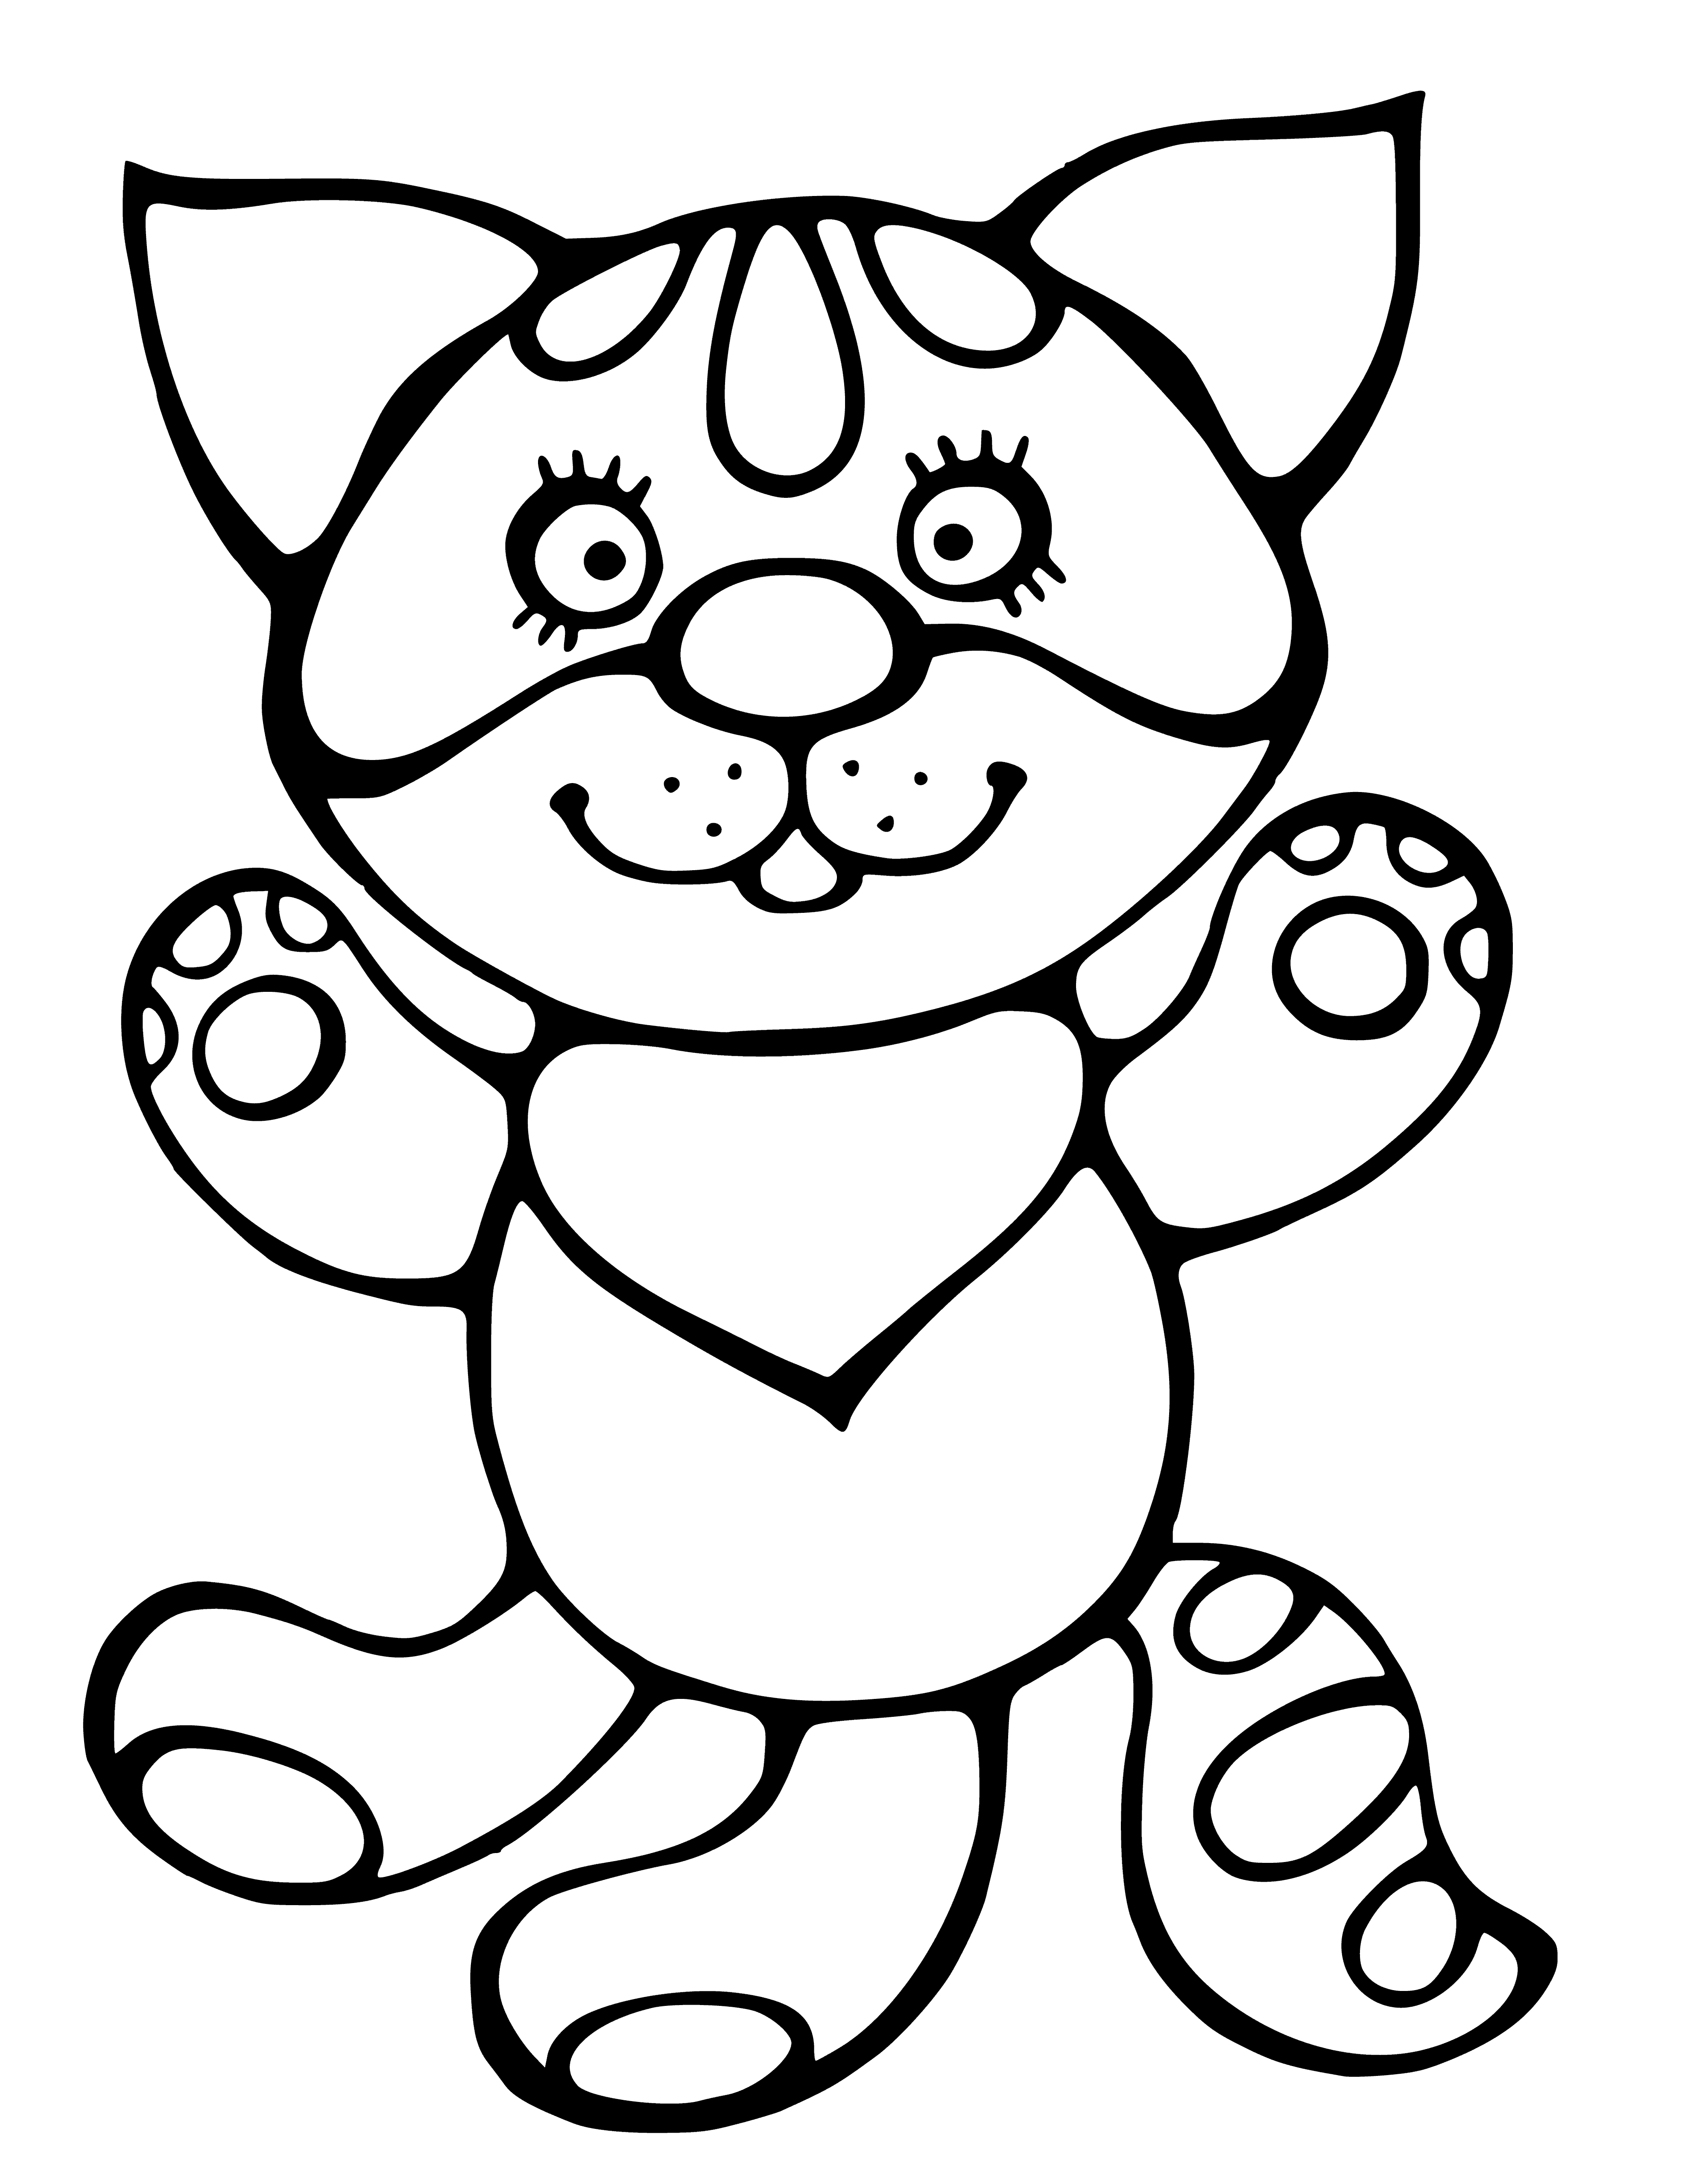 coloring page: A fluffy small kitten sits on a white couch and looks at the camera with bright green eyes, its tongue poking out.